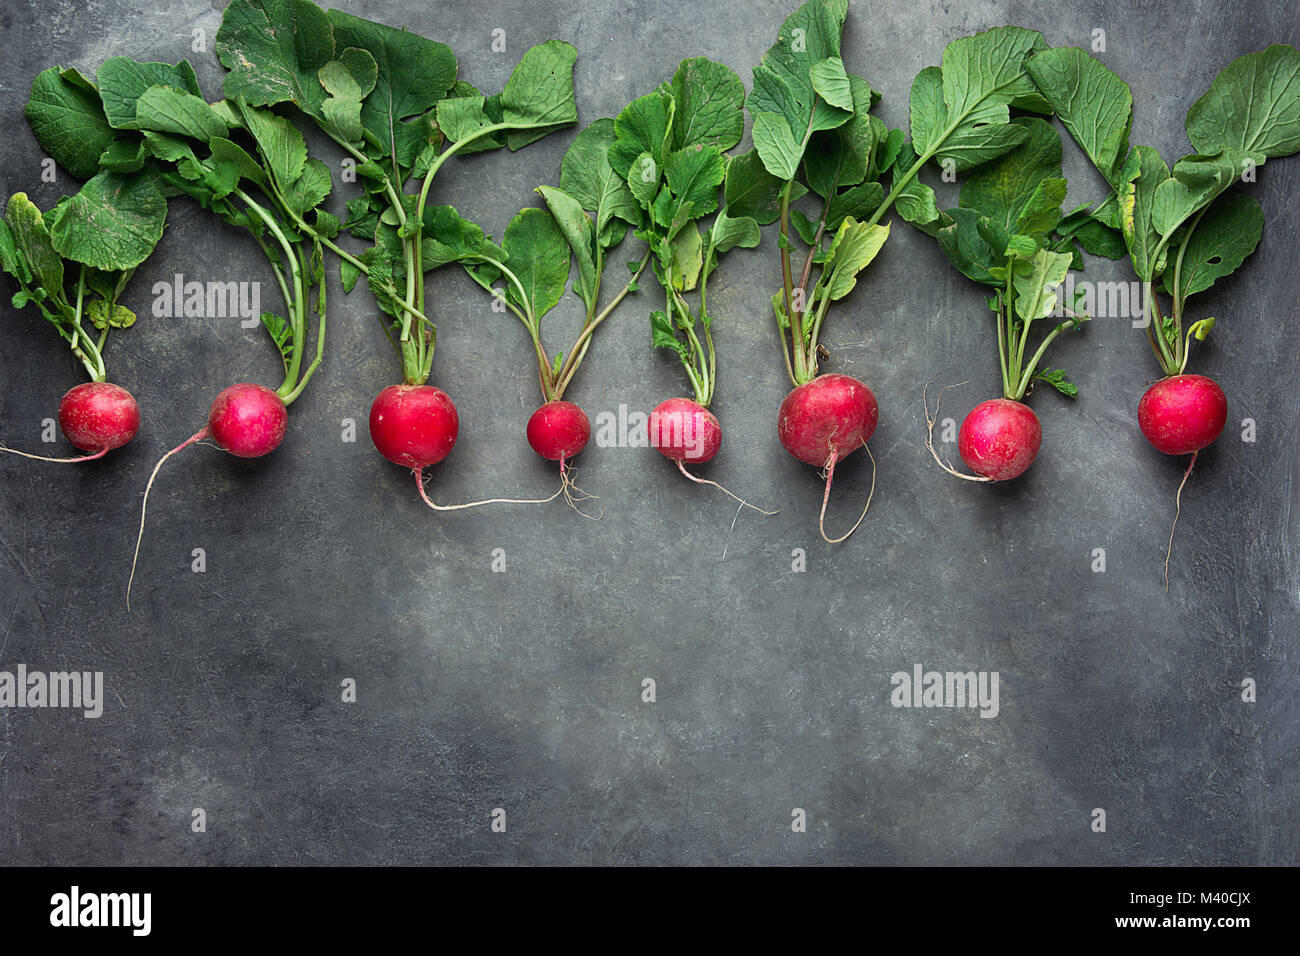 Row of Fresh Raw Organic Red Radishes with Greenn Leaves Arranged in Upper Row Border on Dark Concrete Stone Background. Copy Space for Text. Website  Stock Photo